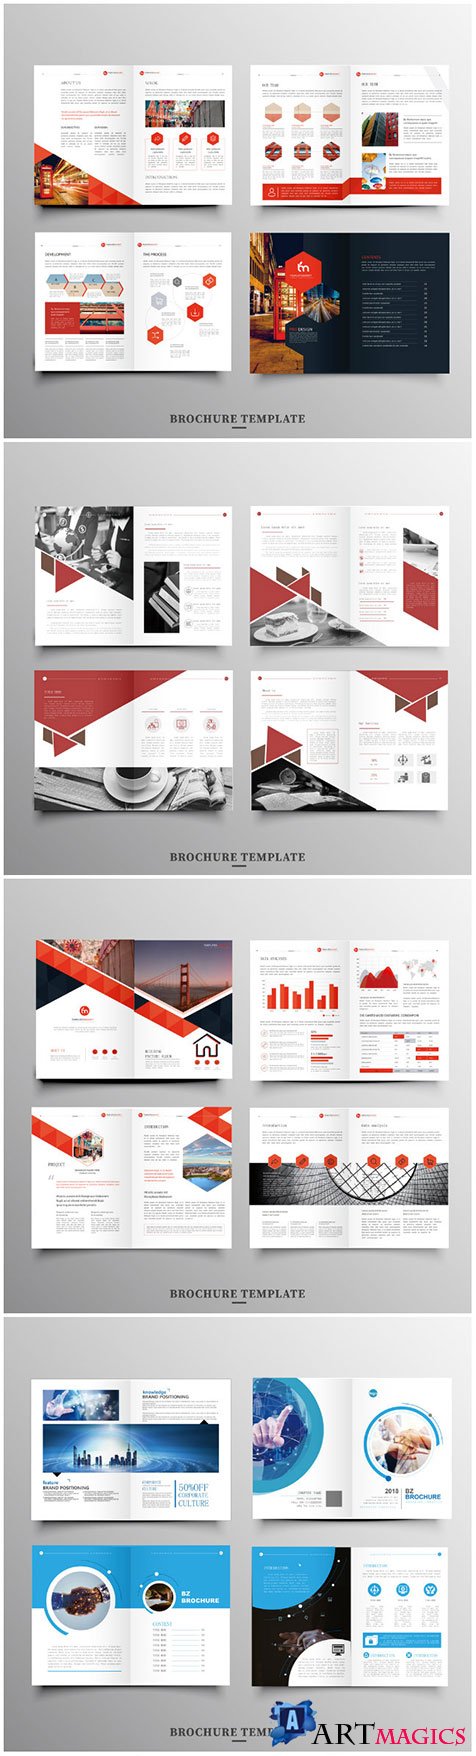 Brochure template vector layout design, corporate business annual report, magazine, flyer mockup # 241